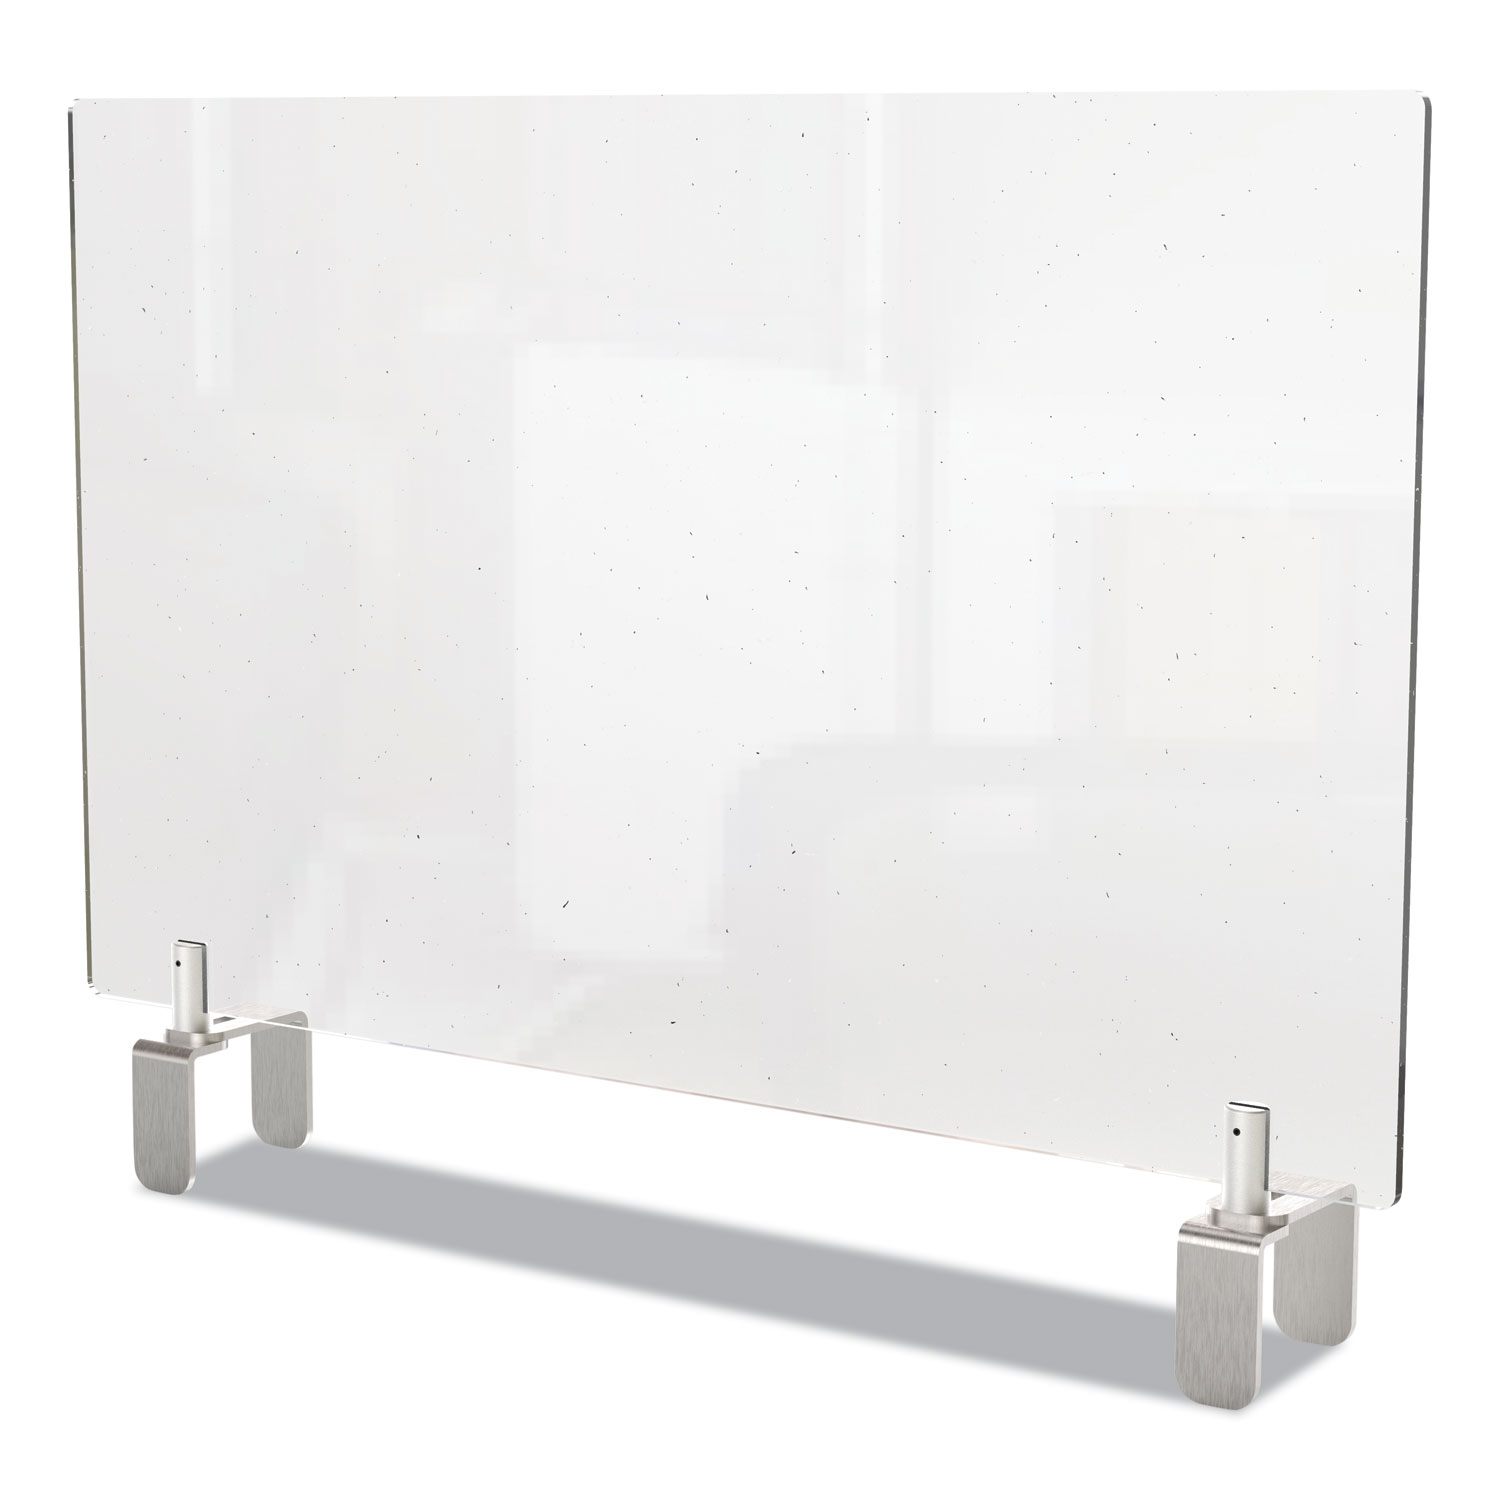  Ghent PEC3042-A Clear Partition Extender with Attached Clamp, 42 x 3.88 x 30, Thermoplastic Sheeting (GHEPEC3042A) 